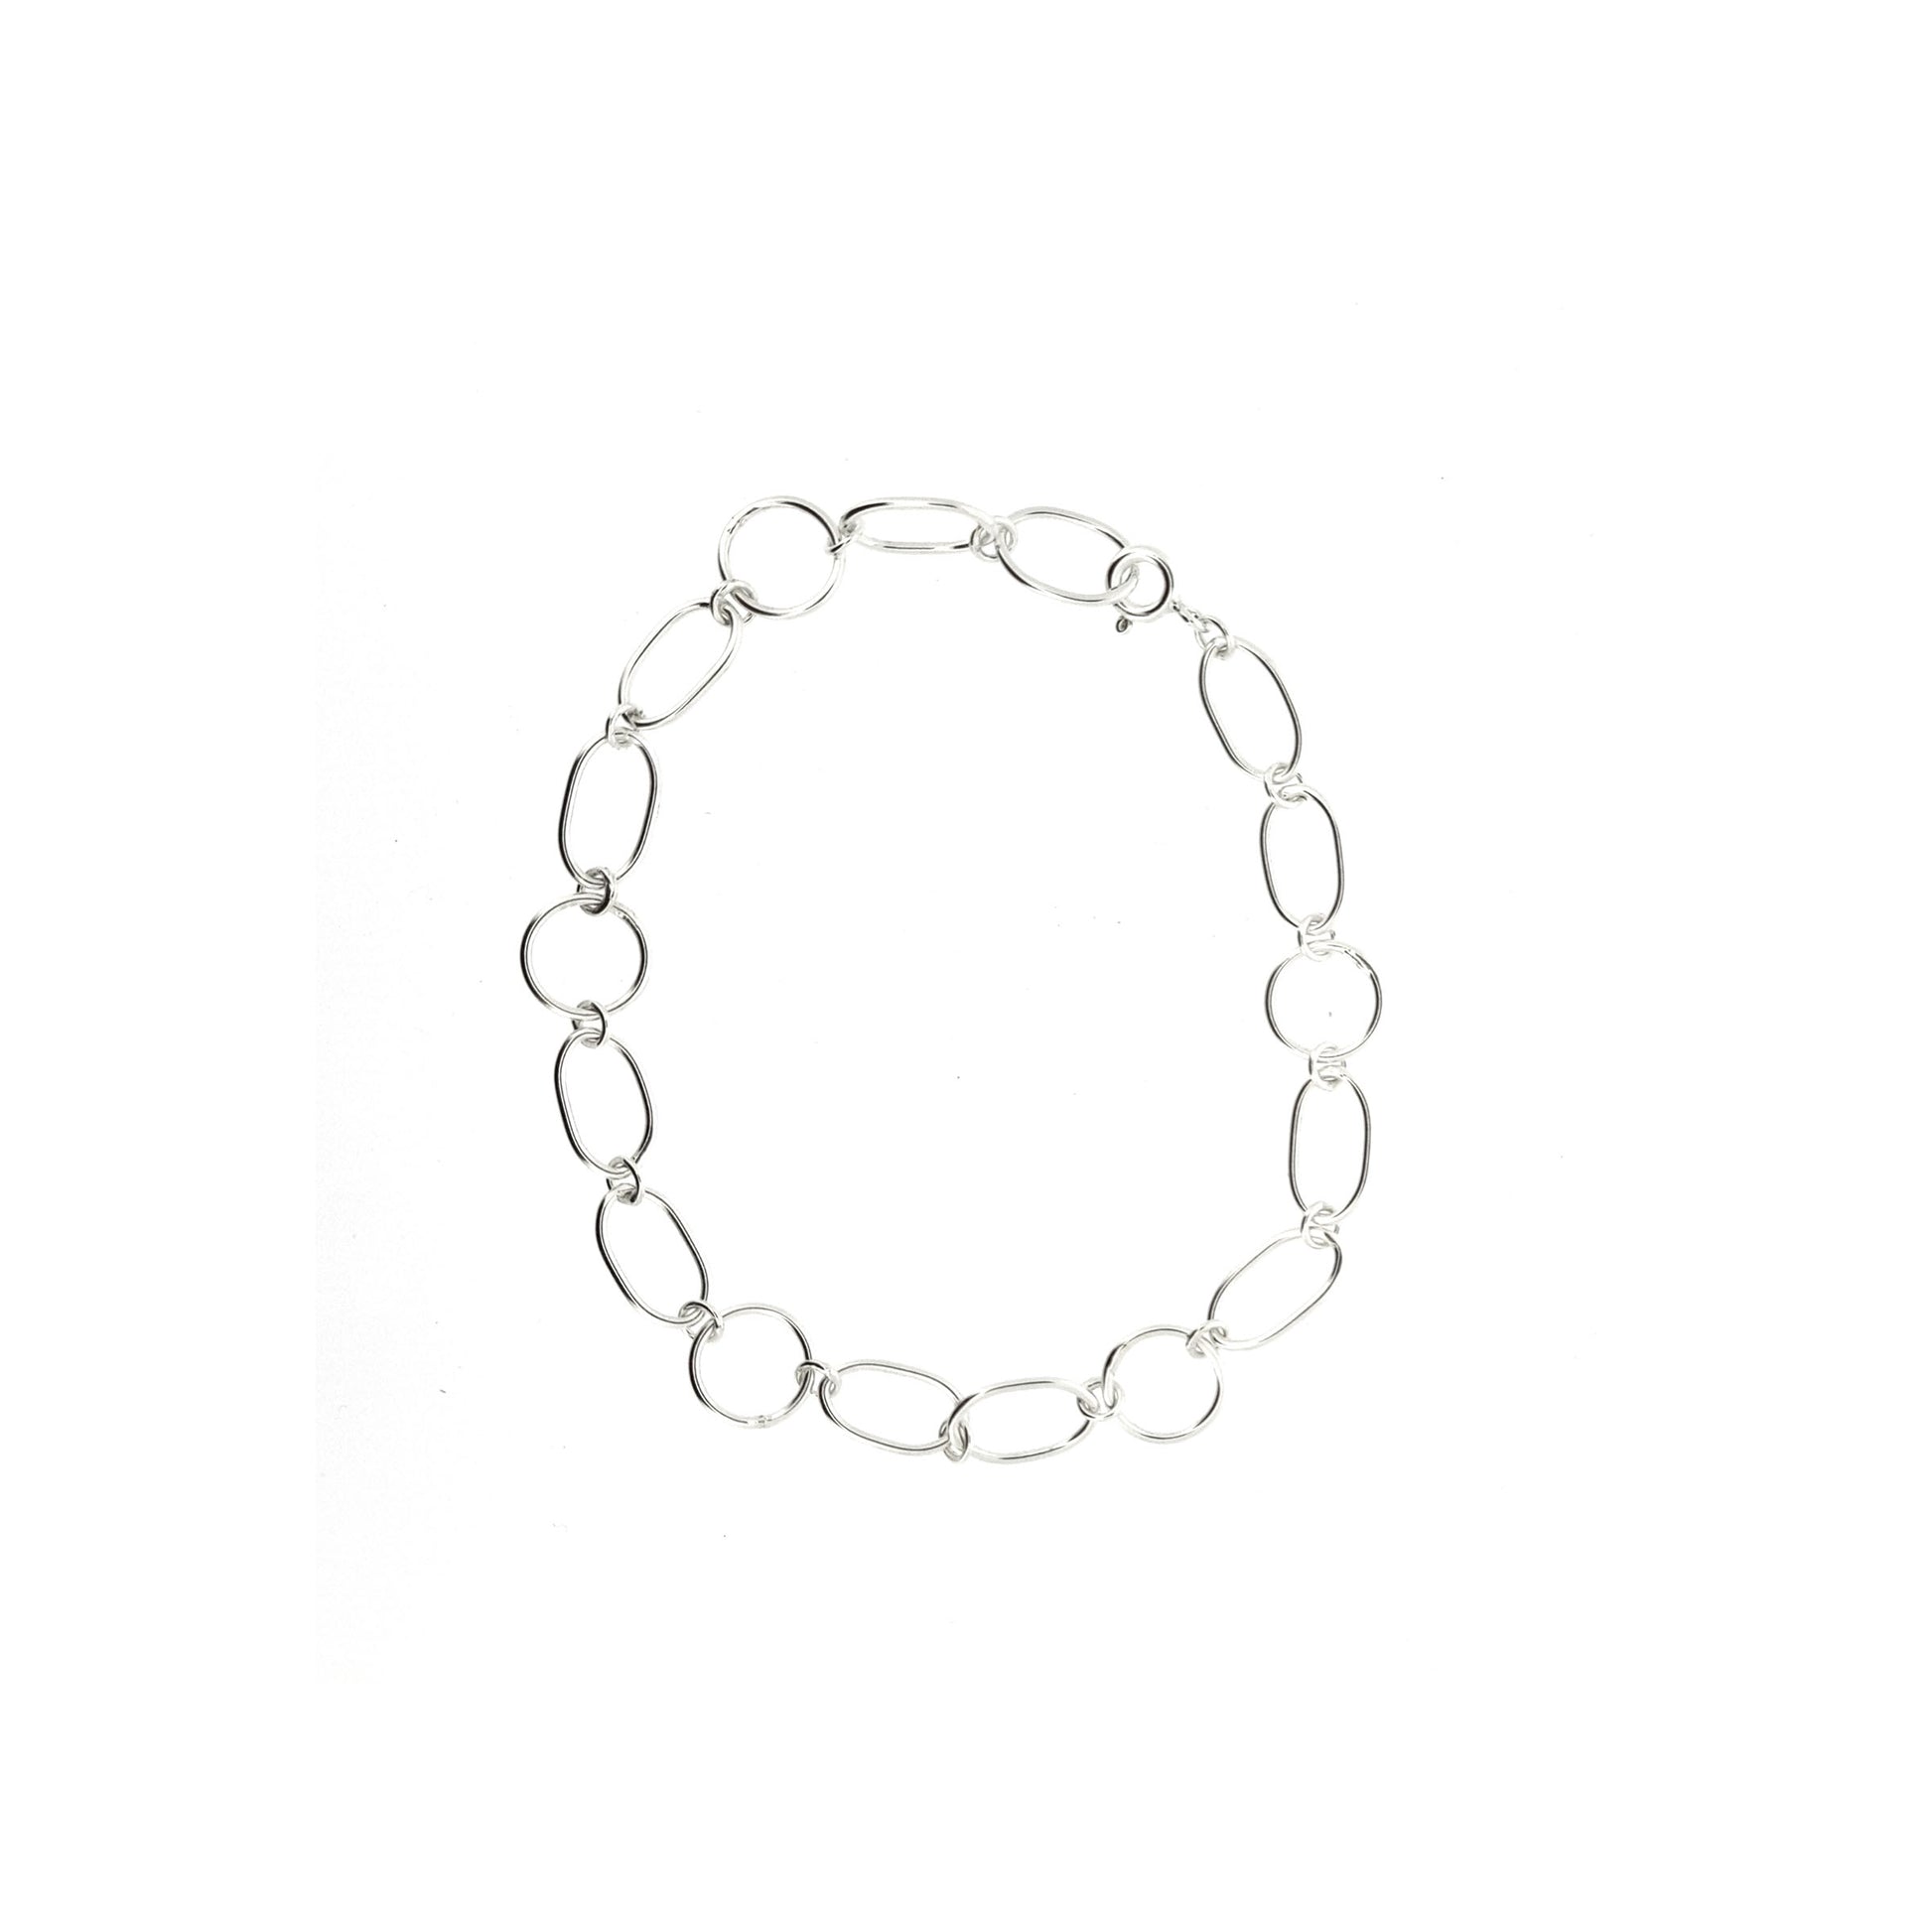 Silver chain link bracelet made of oval and circle links.